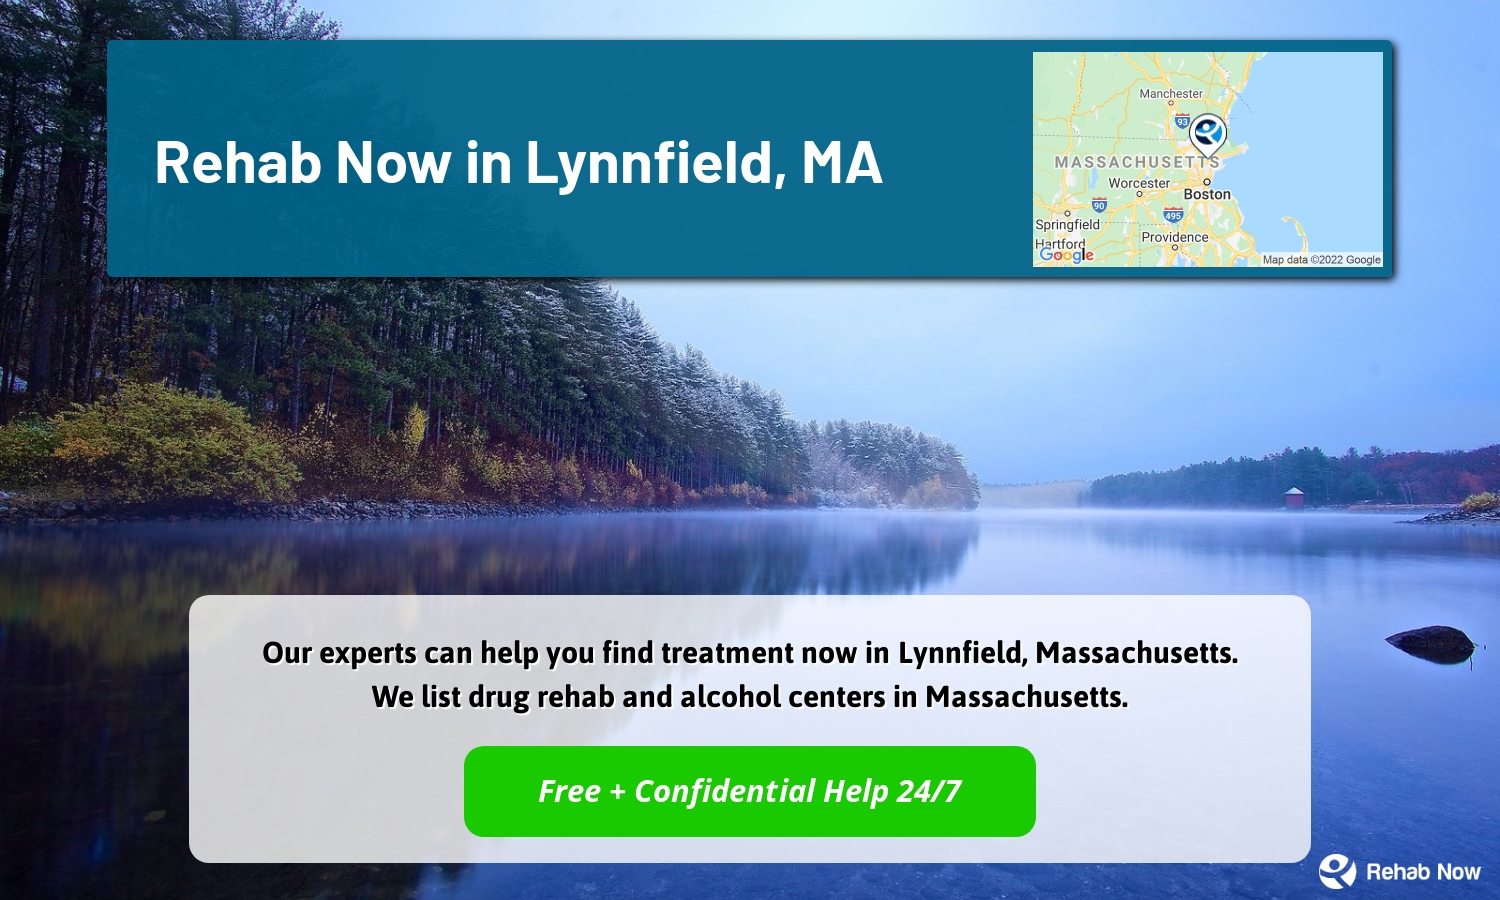 Our experts can help you find treatment now in Lynnfield, Massachusetts. We list drug rehab and alcohol centers in Massachusetts.